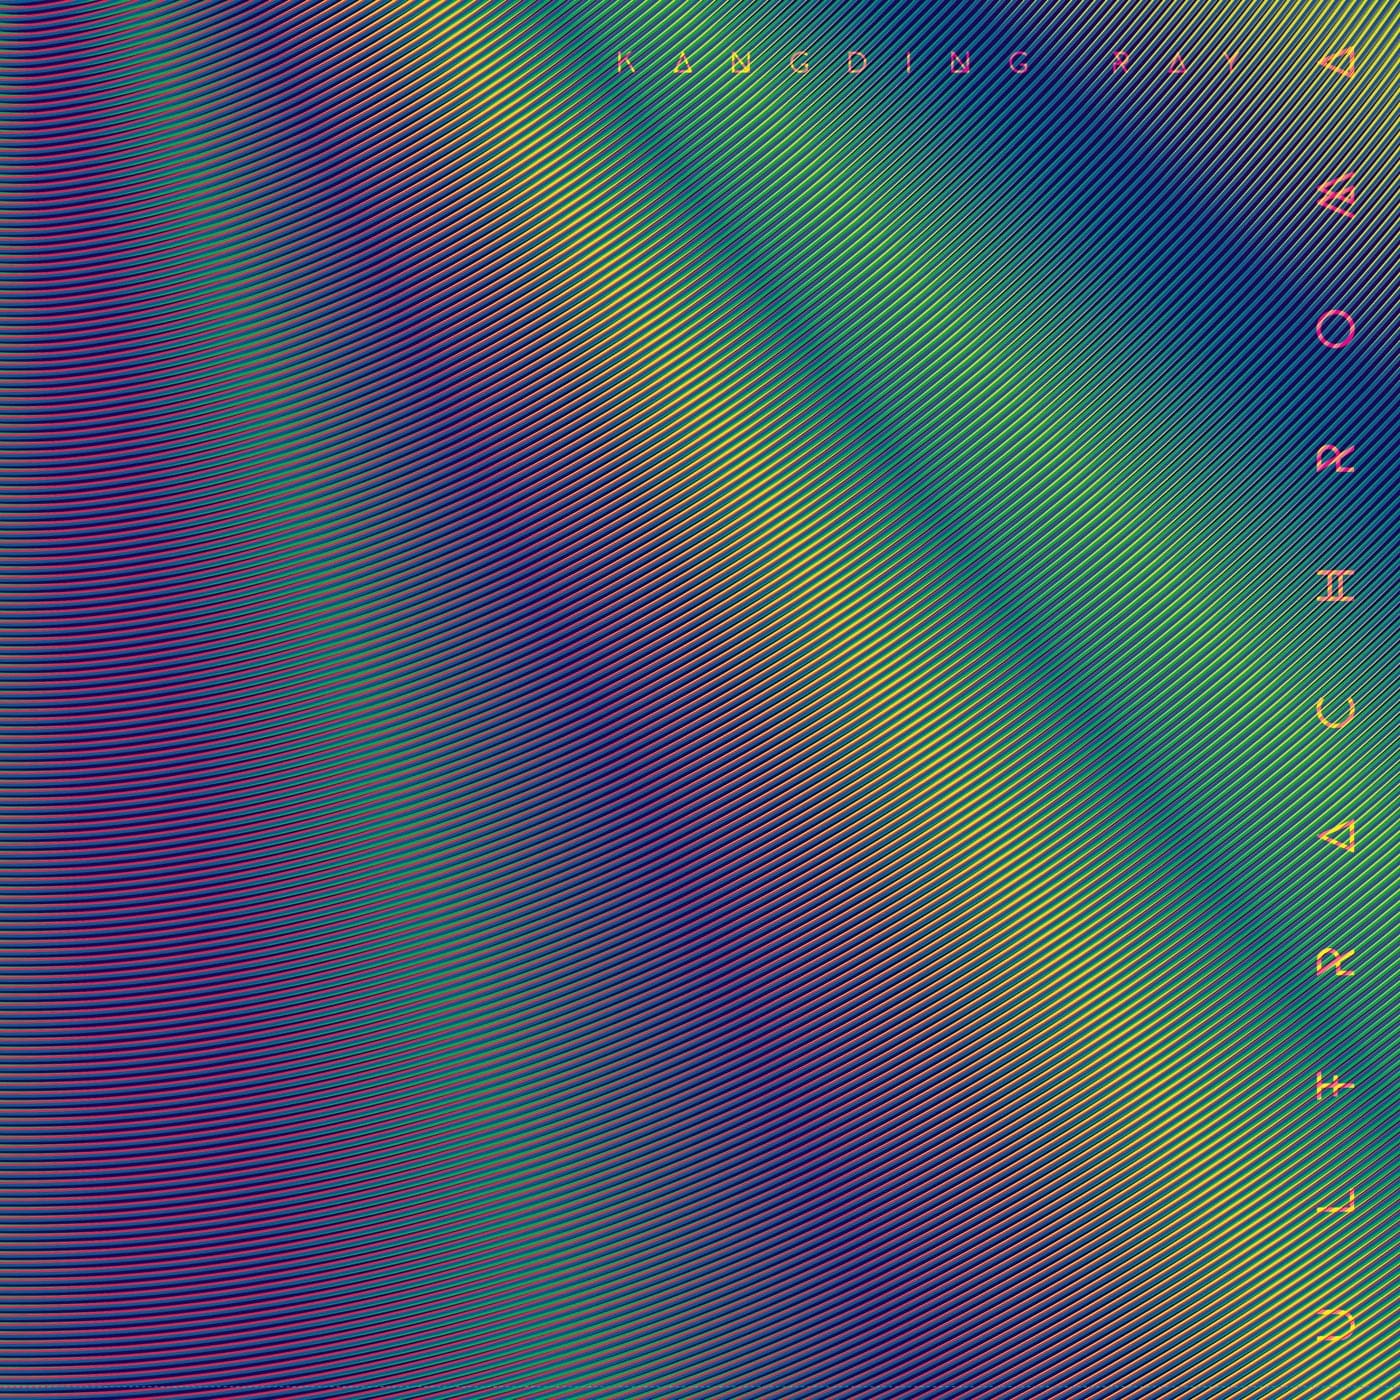 image cover: Kangding Ray - Ultrachroma / ARA010D